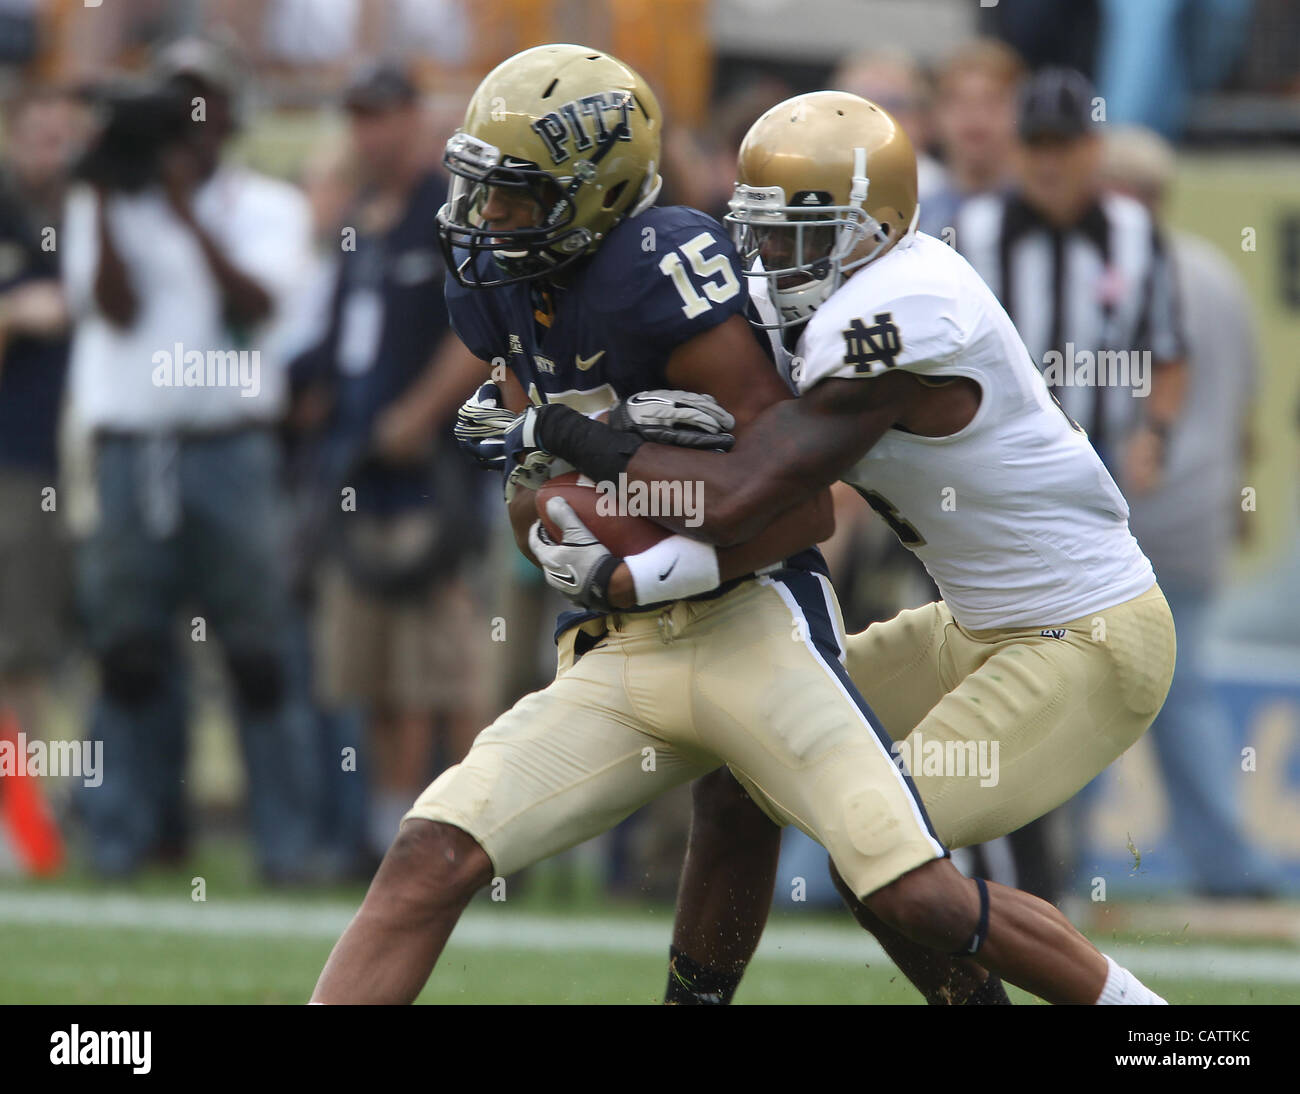 Sept. 24, 2011 - Pittsburgh, Pennsylvania, USA - Notre Dame Fighting Irish cornerback Gary Gray (4). The Notre Dame Fighting Irish were able to hold onto a slight lead to beat the University of Pittsburgh Panthers in Hienz Field.  Photo By Aaron Suozzi (Credit Image: © Aaron Souzzi/ZUMAPRESS.com) Stock Photo